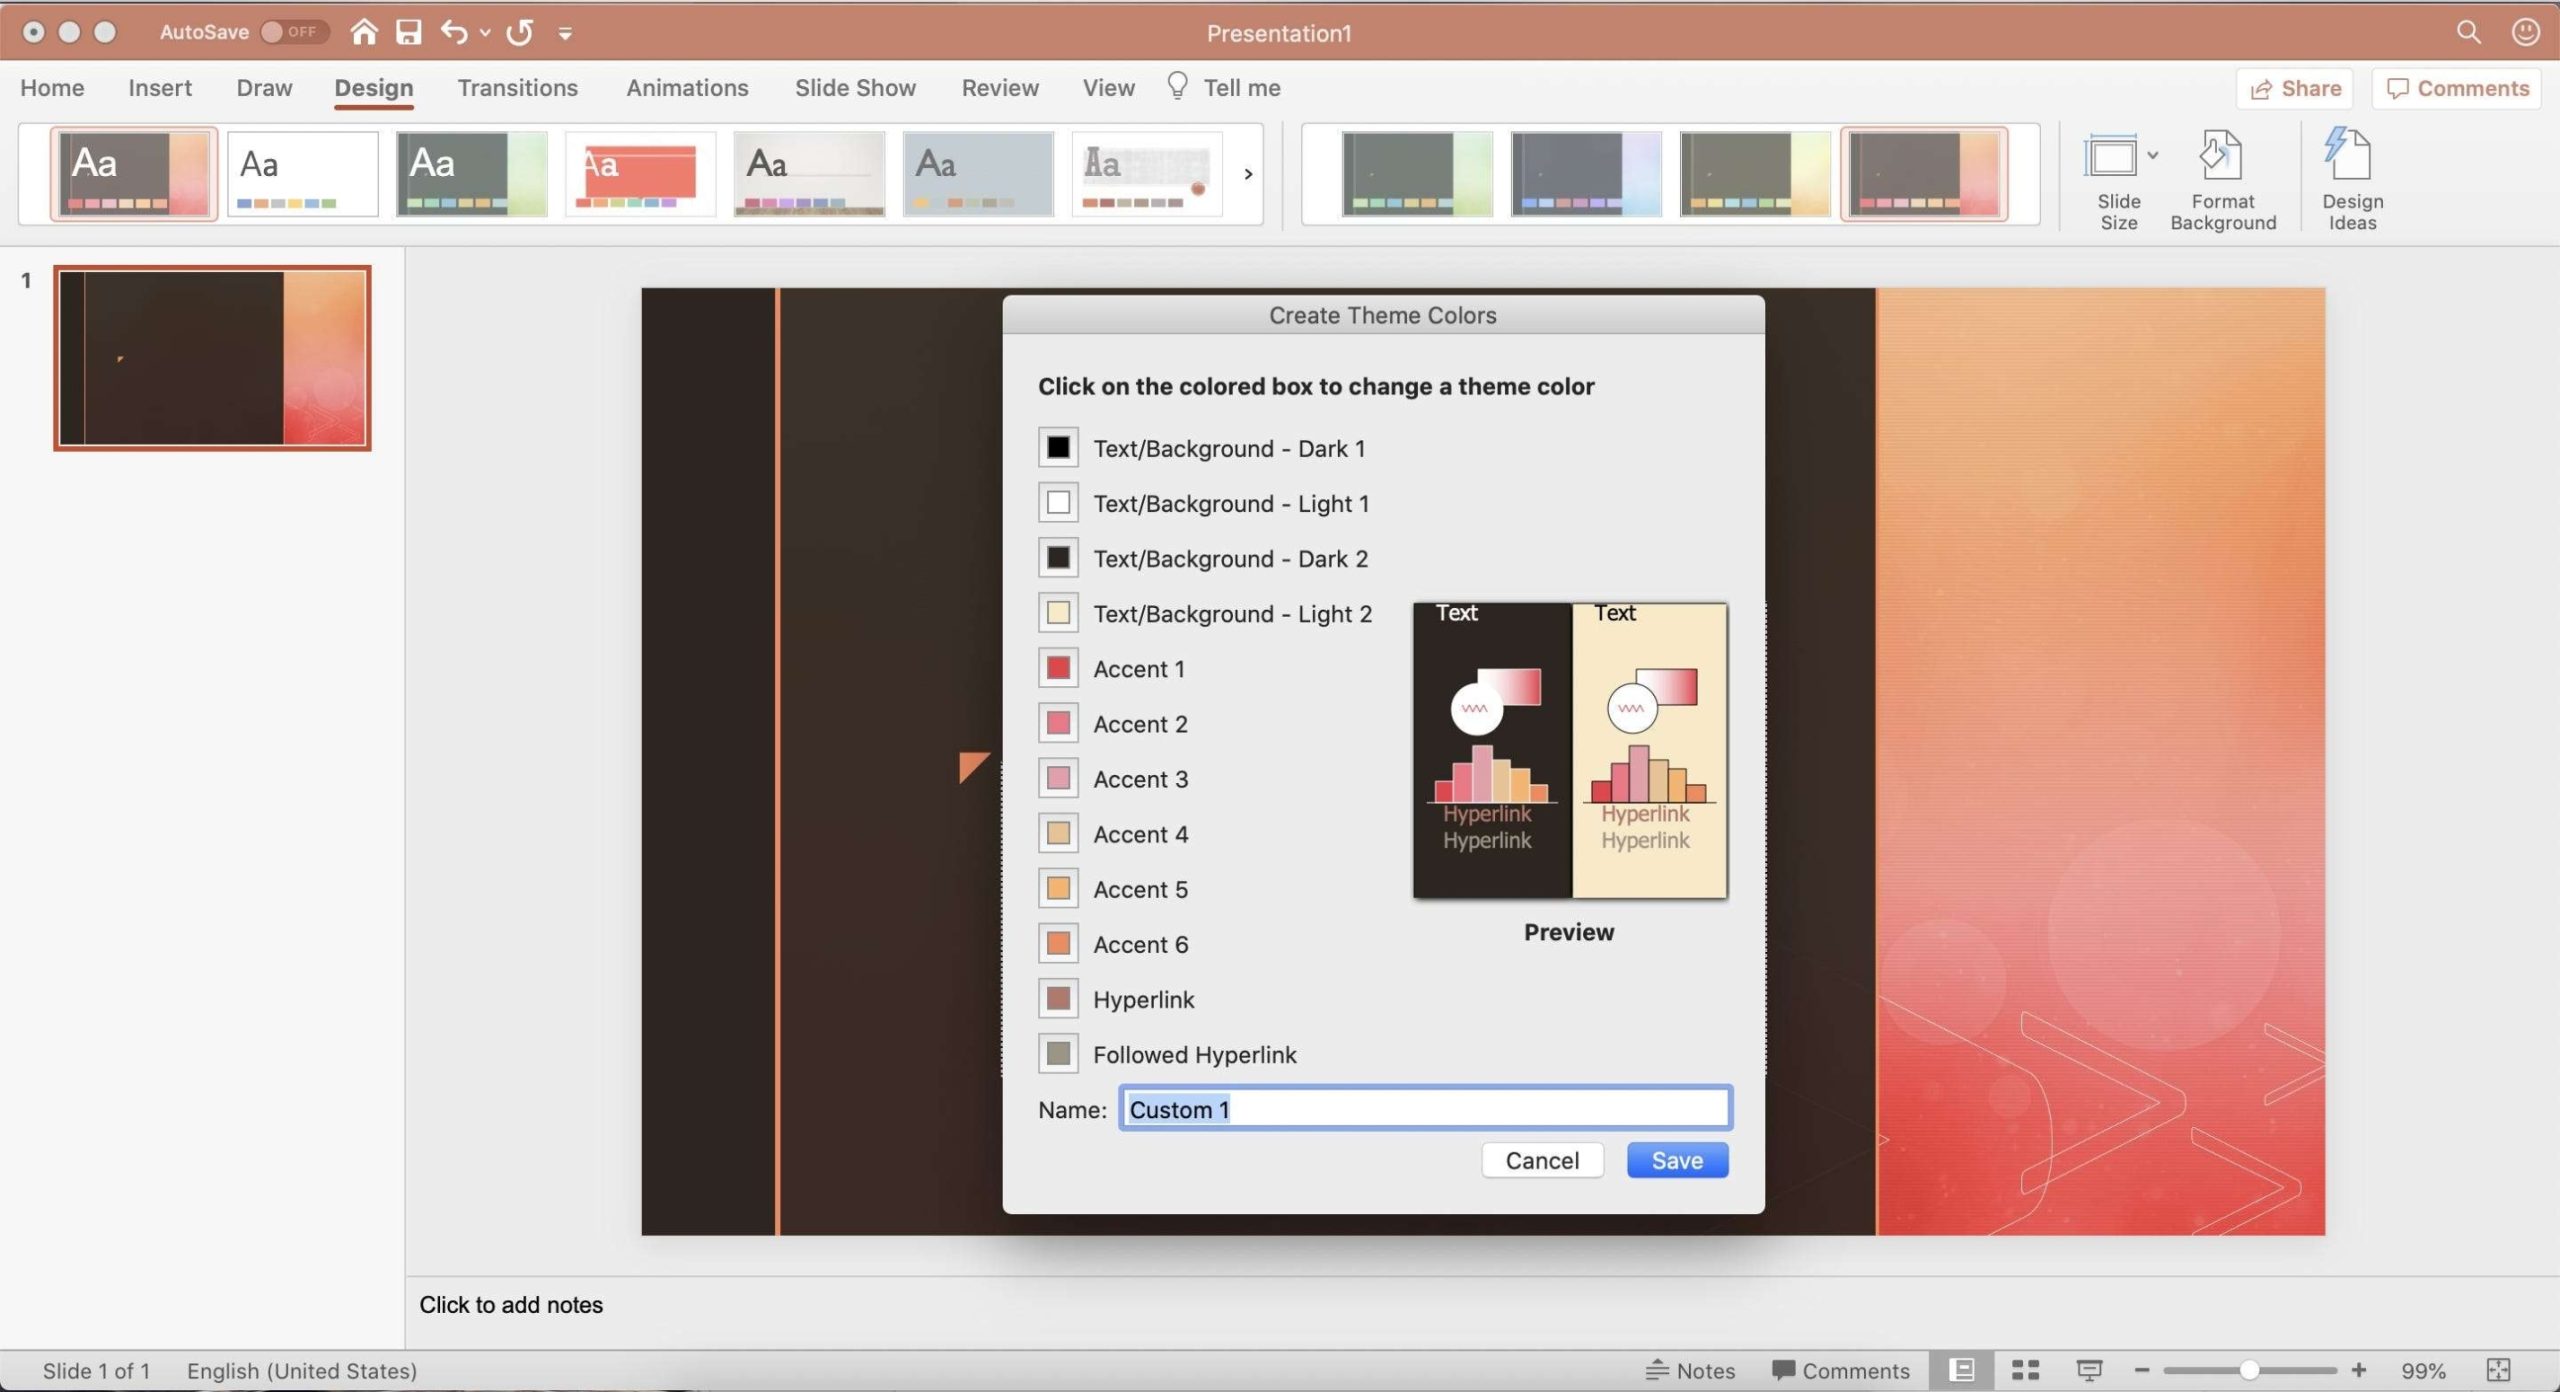 How To Edit A Microsoft Powerpoint Template To Change Its Default Color Theme, Font, And More Pertaining To How To Edit A Powerpoint Template